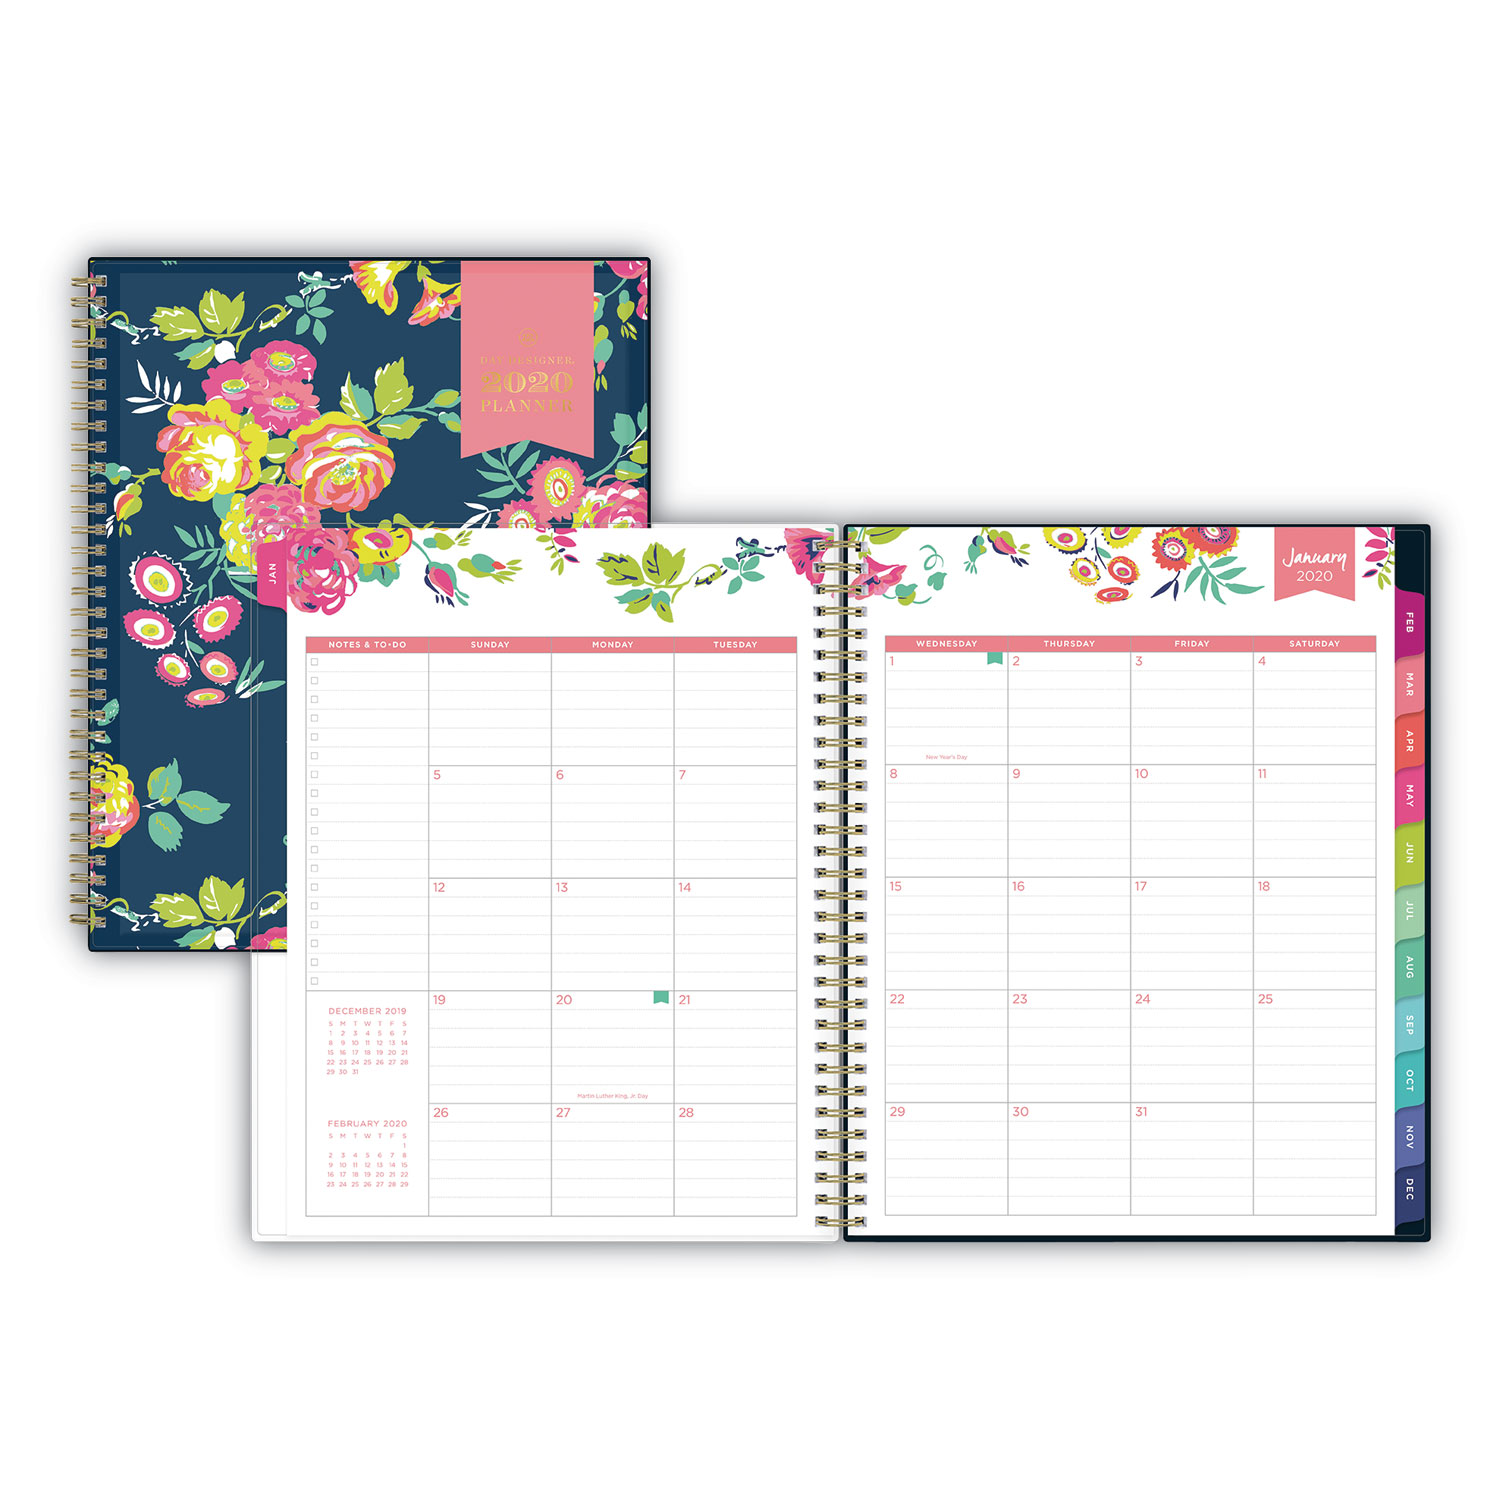  Blue Sky BLS103617 Day Designer CYO Weekly/Monthly Planner, 11 x 8 1/2, Navy/Floral, 2020 (BLS103617) 